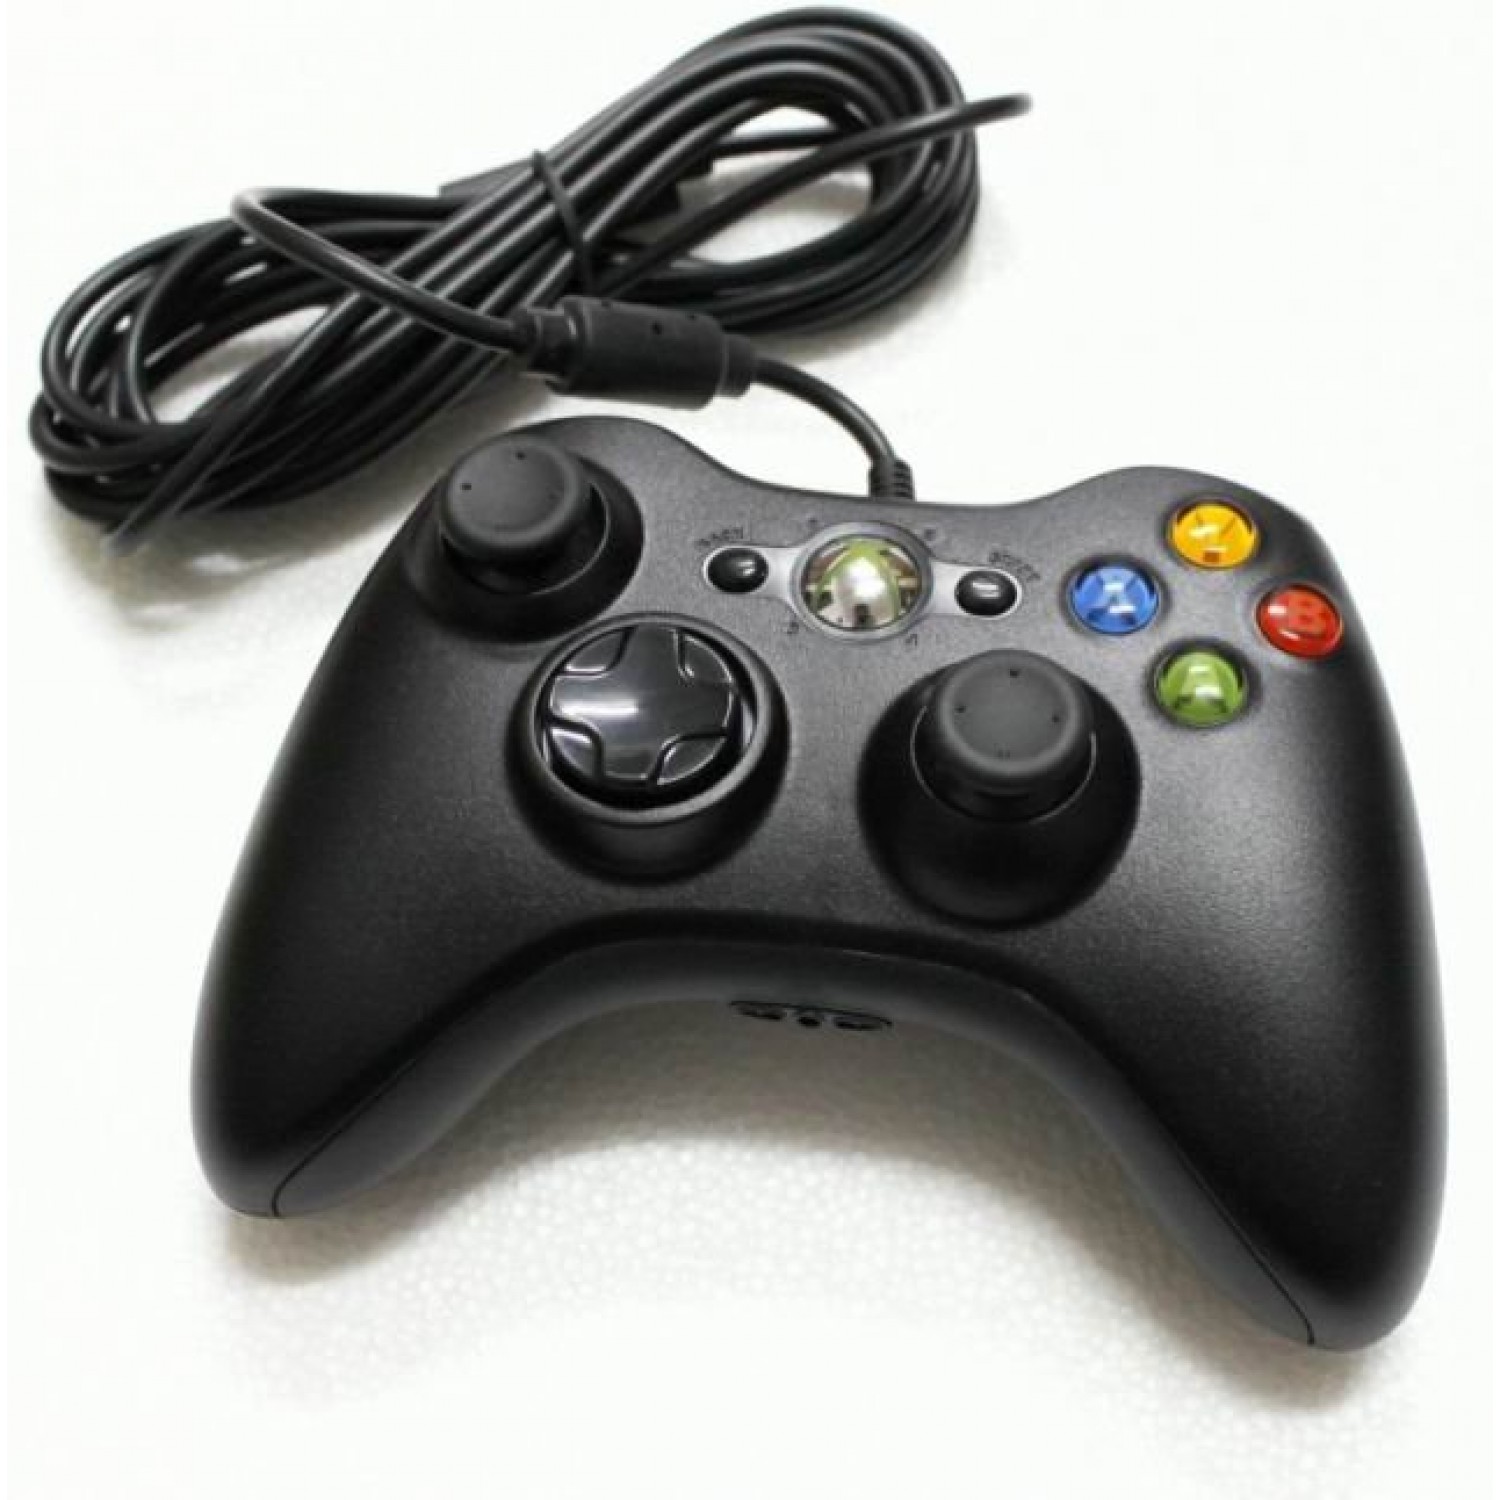  Xbox 360 for Windows Wireless Game pad -1